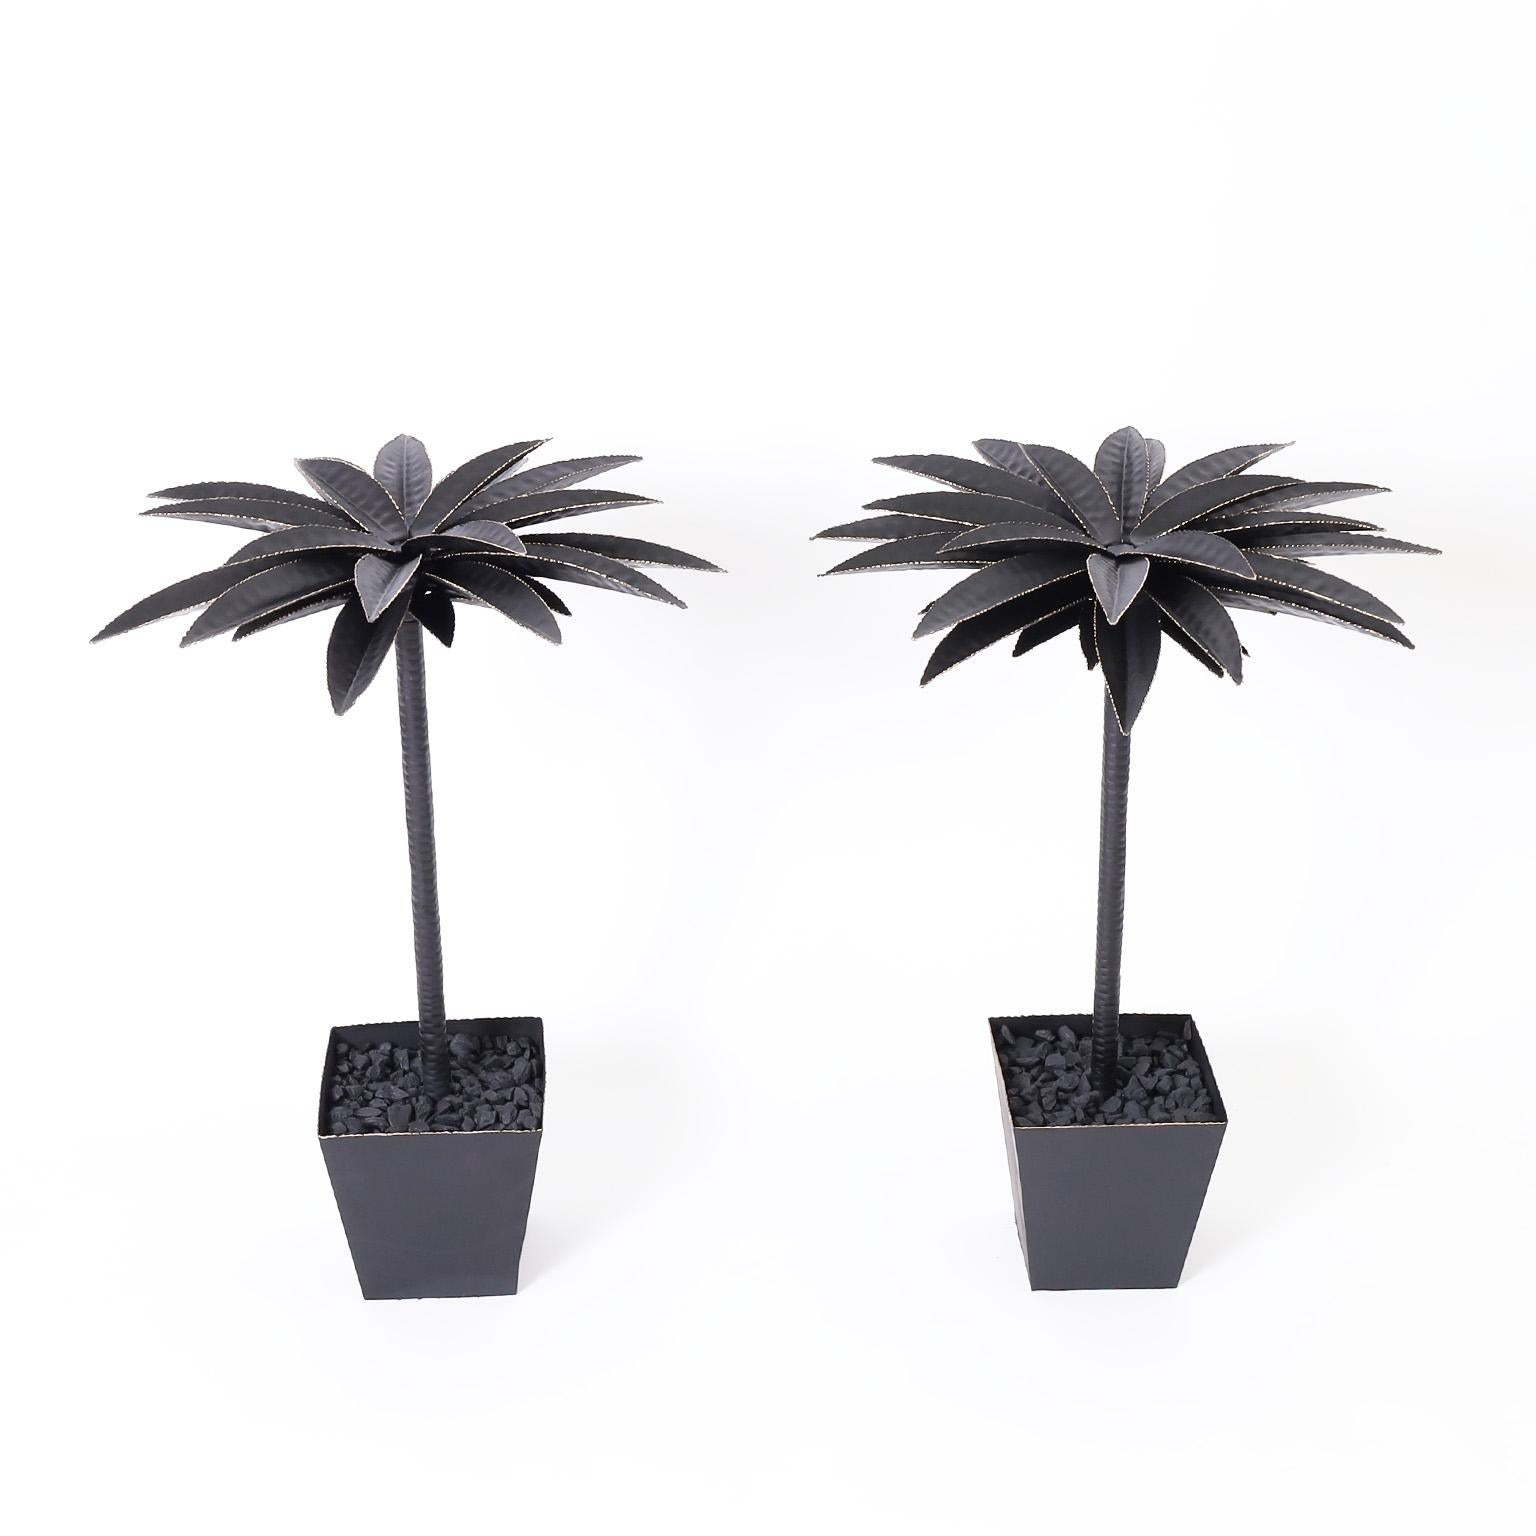 Pair of tole or painted metal potted palm trees with stylized palm leaves having serrated edges on a trunk in a geometric planter with affixed black rocks.